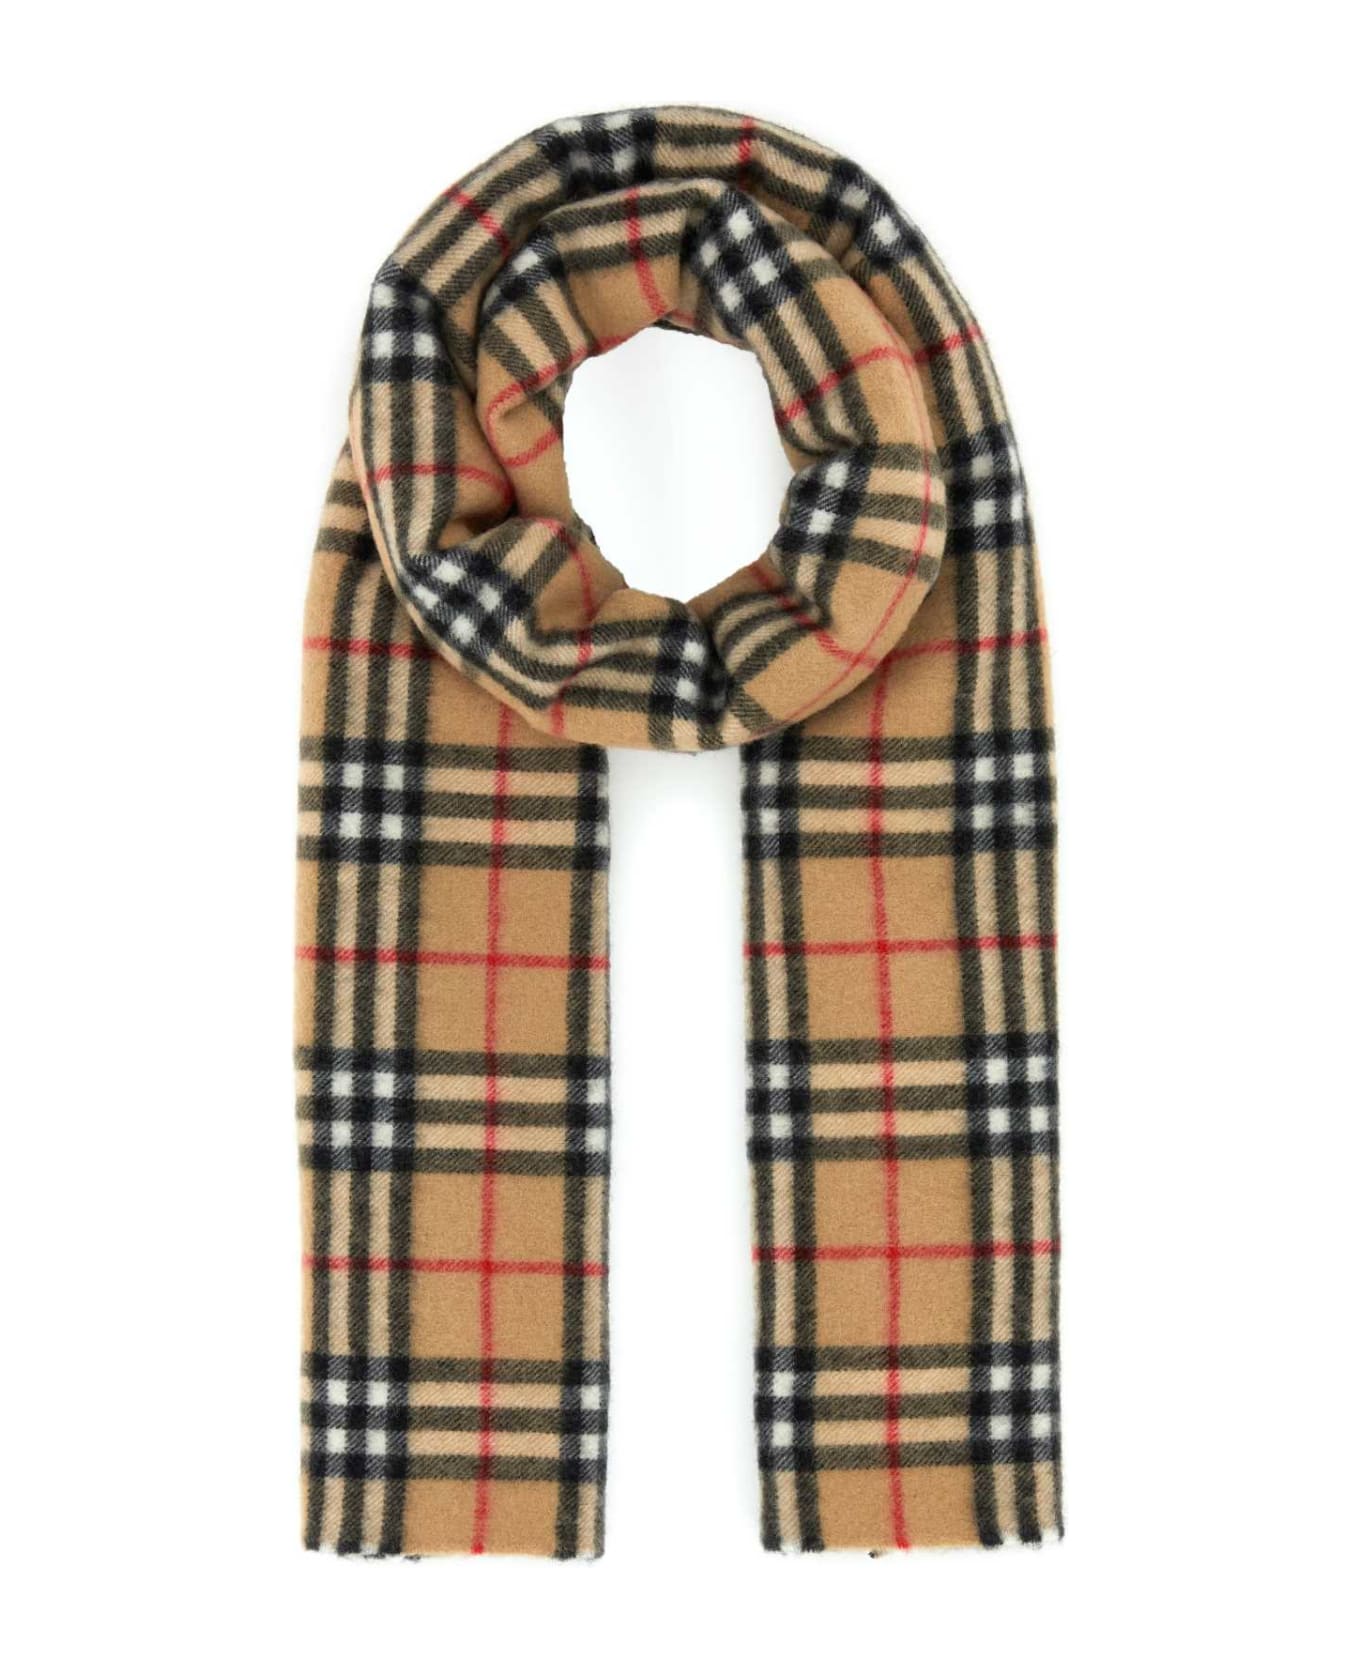 Burberry Embroidered Cashmere Scarf - ARCHIVEBEIGE